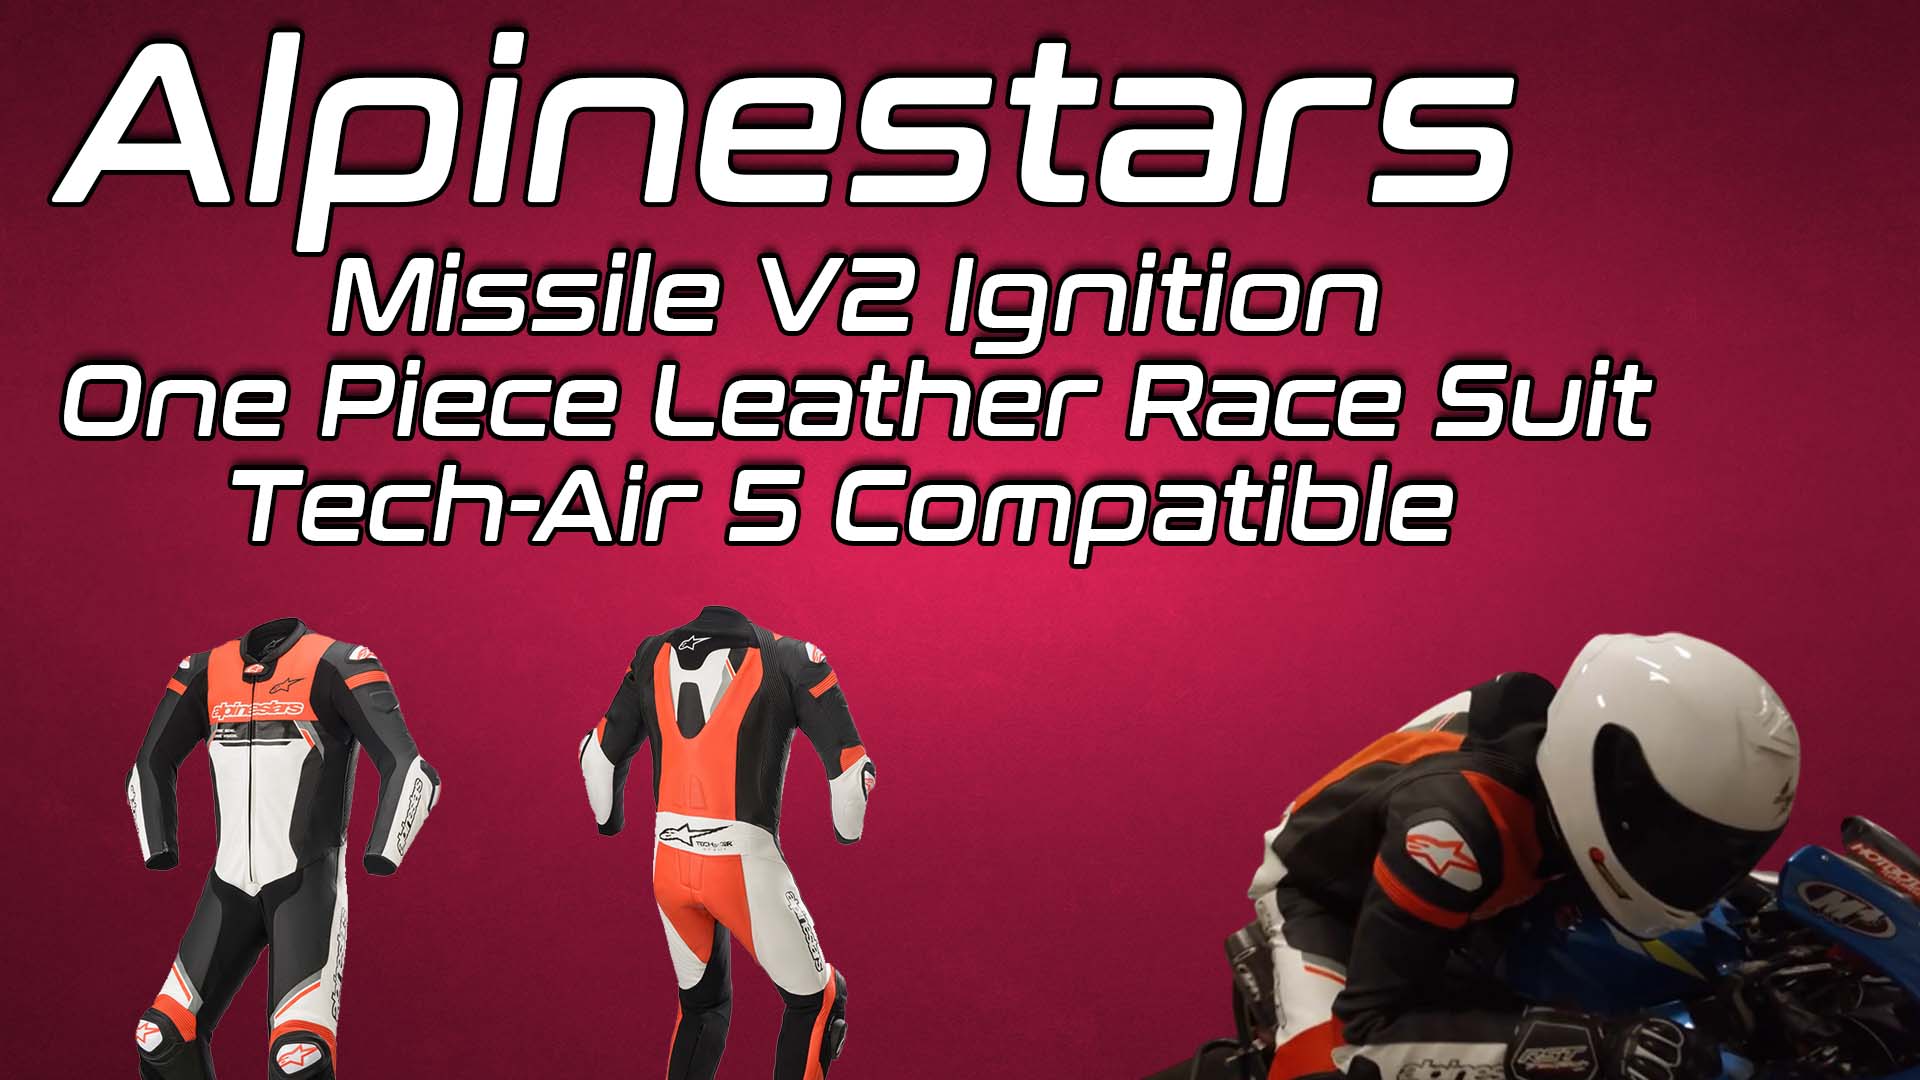 Alpinestars Missile V2 Ignition Leather Race Suit Tech-Air 5 Compatible